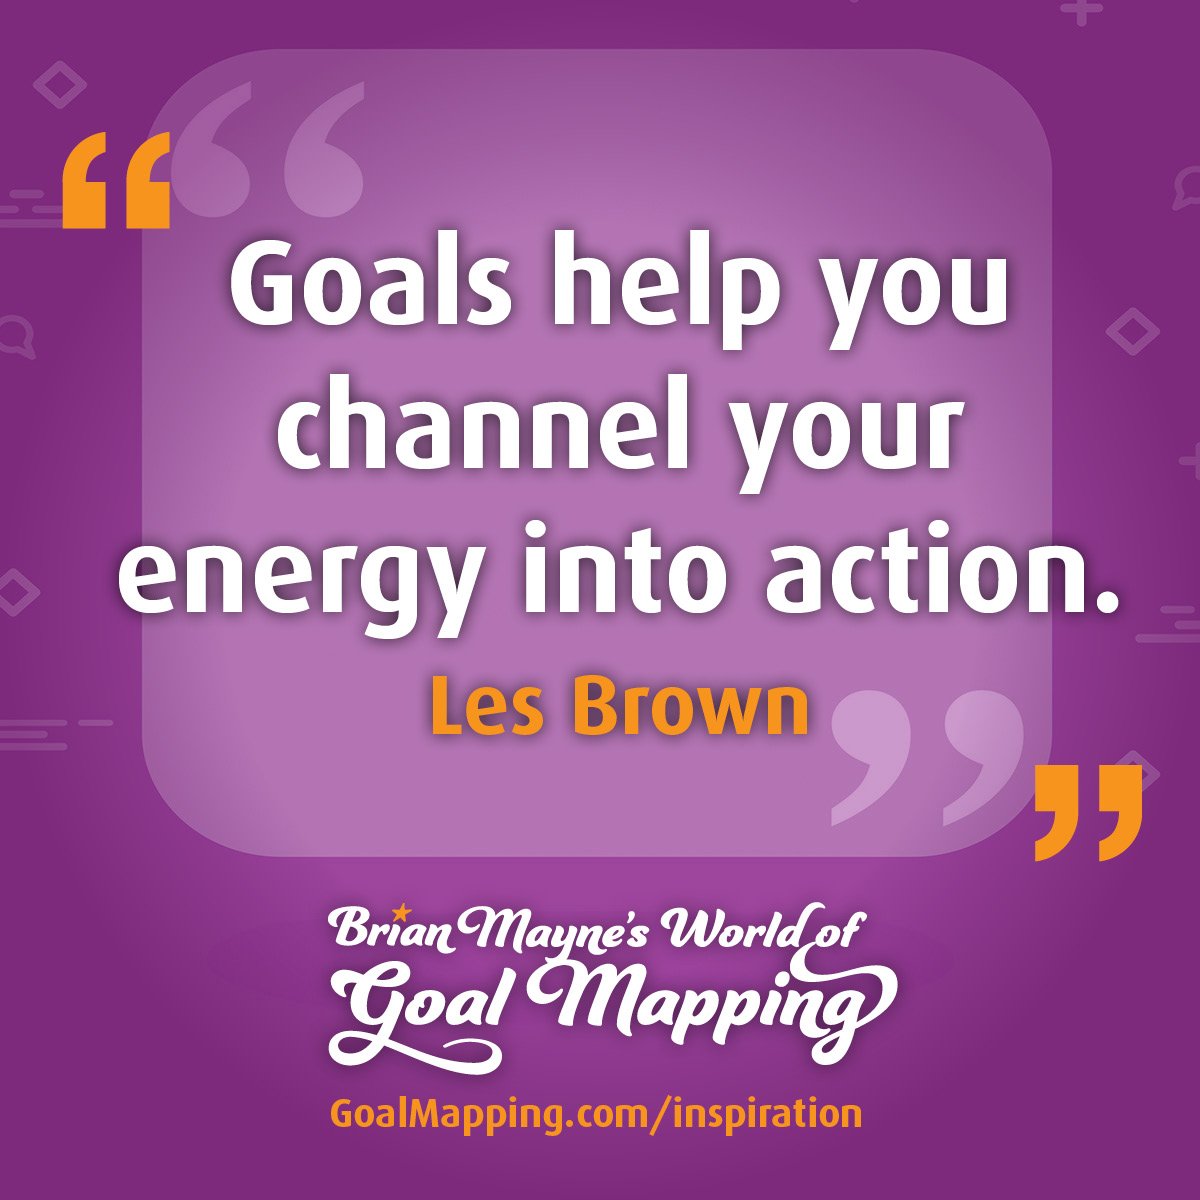 "Goals help you channel your energy into action."  Les Brown